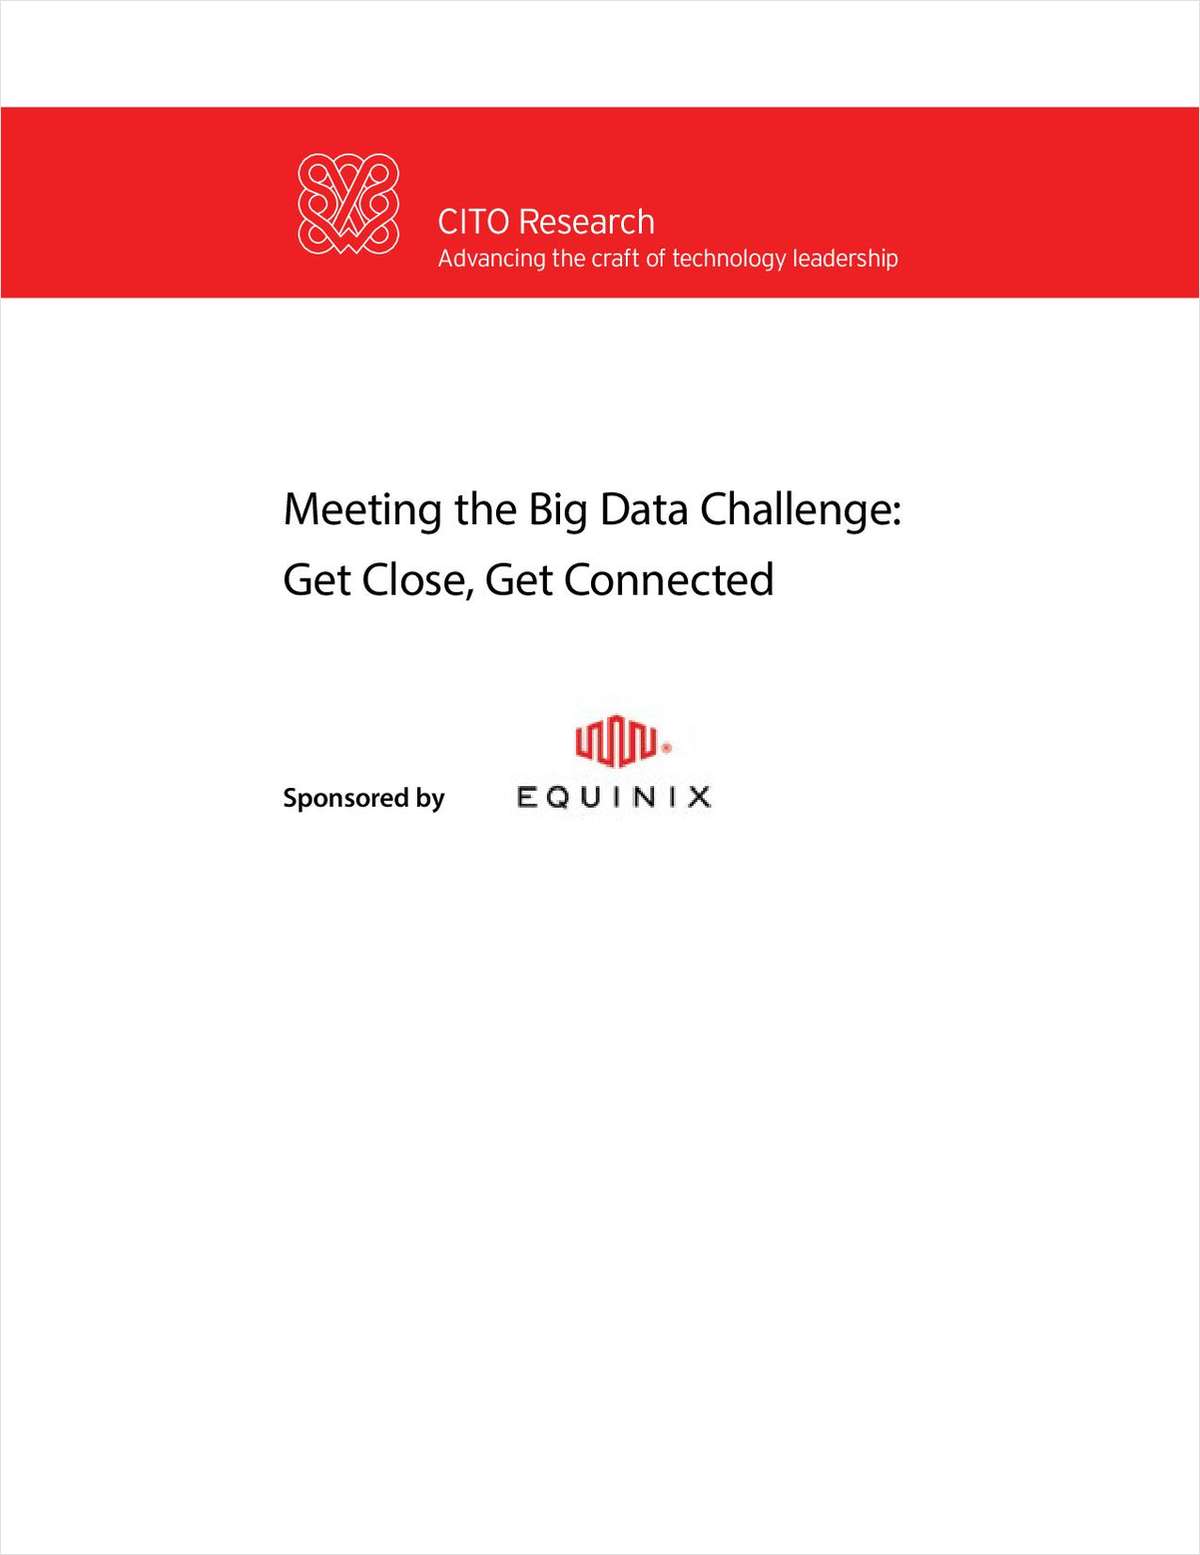 Meeting the Big Data Challenge: Get Close, Get Connected